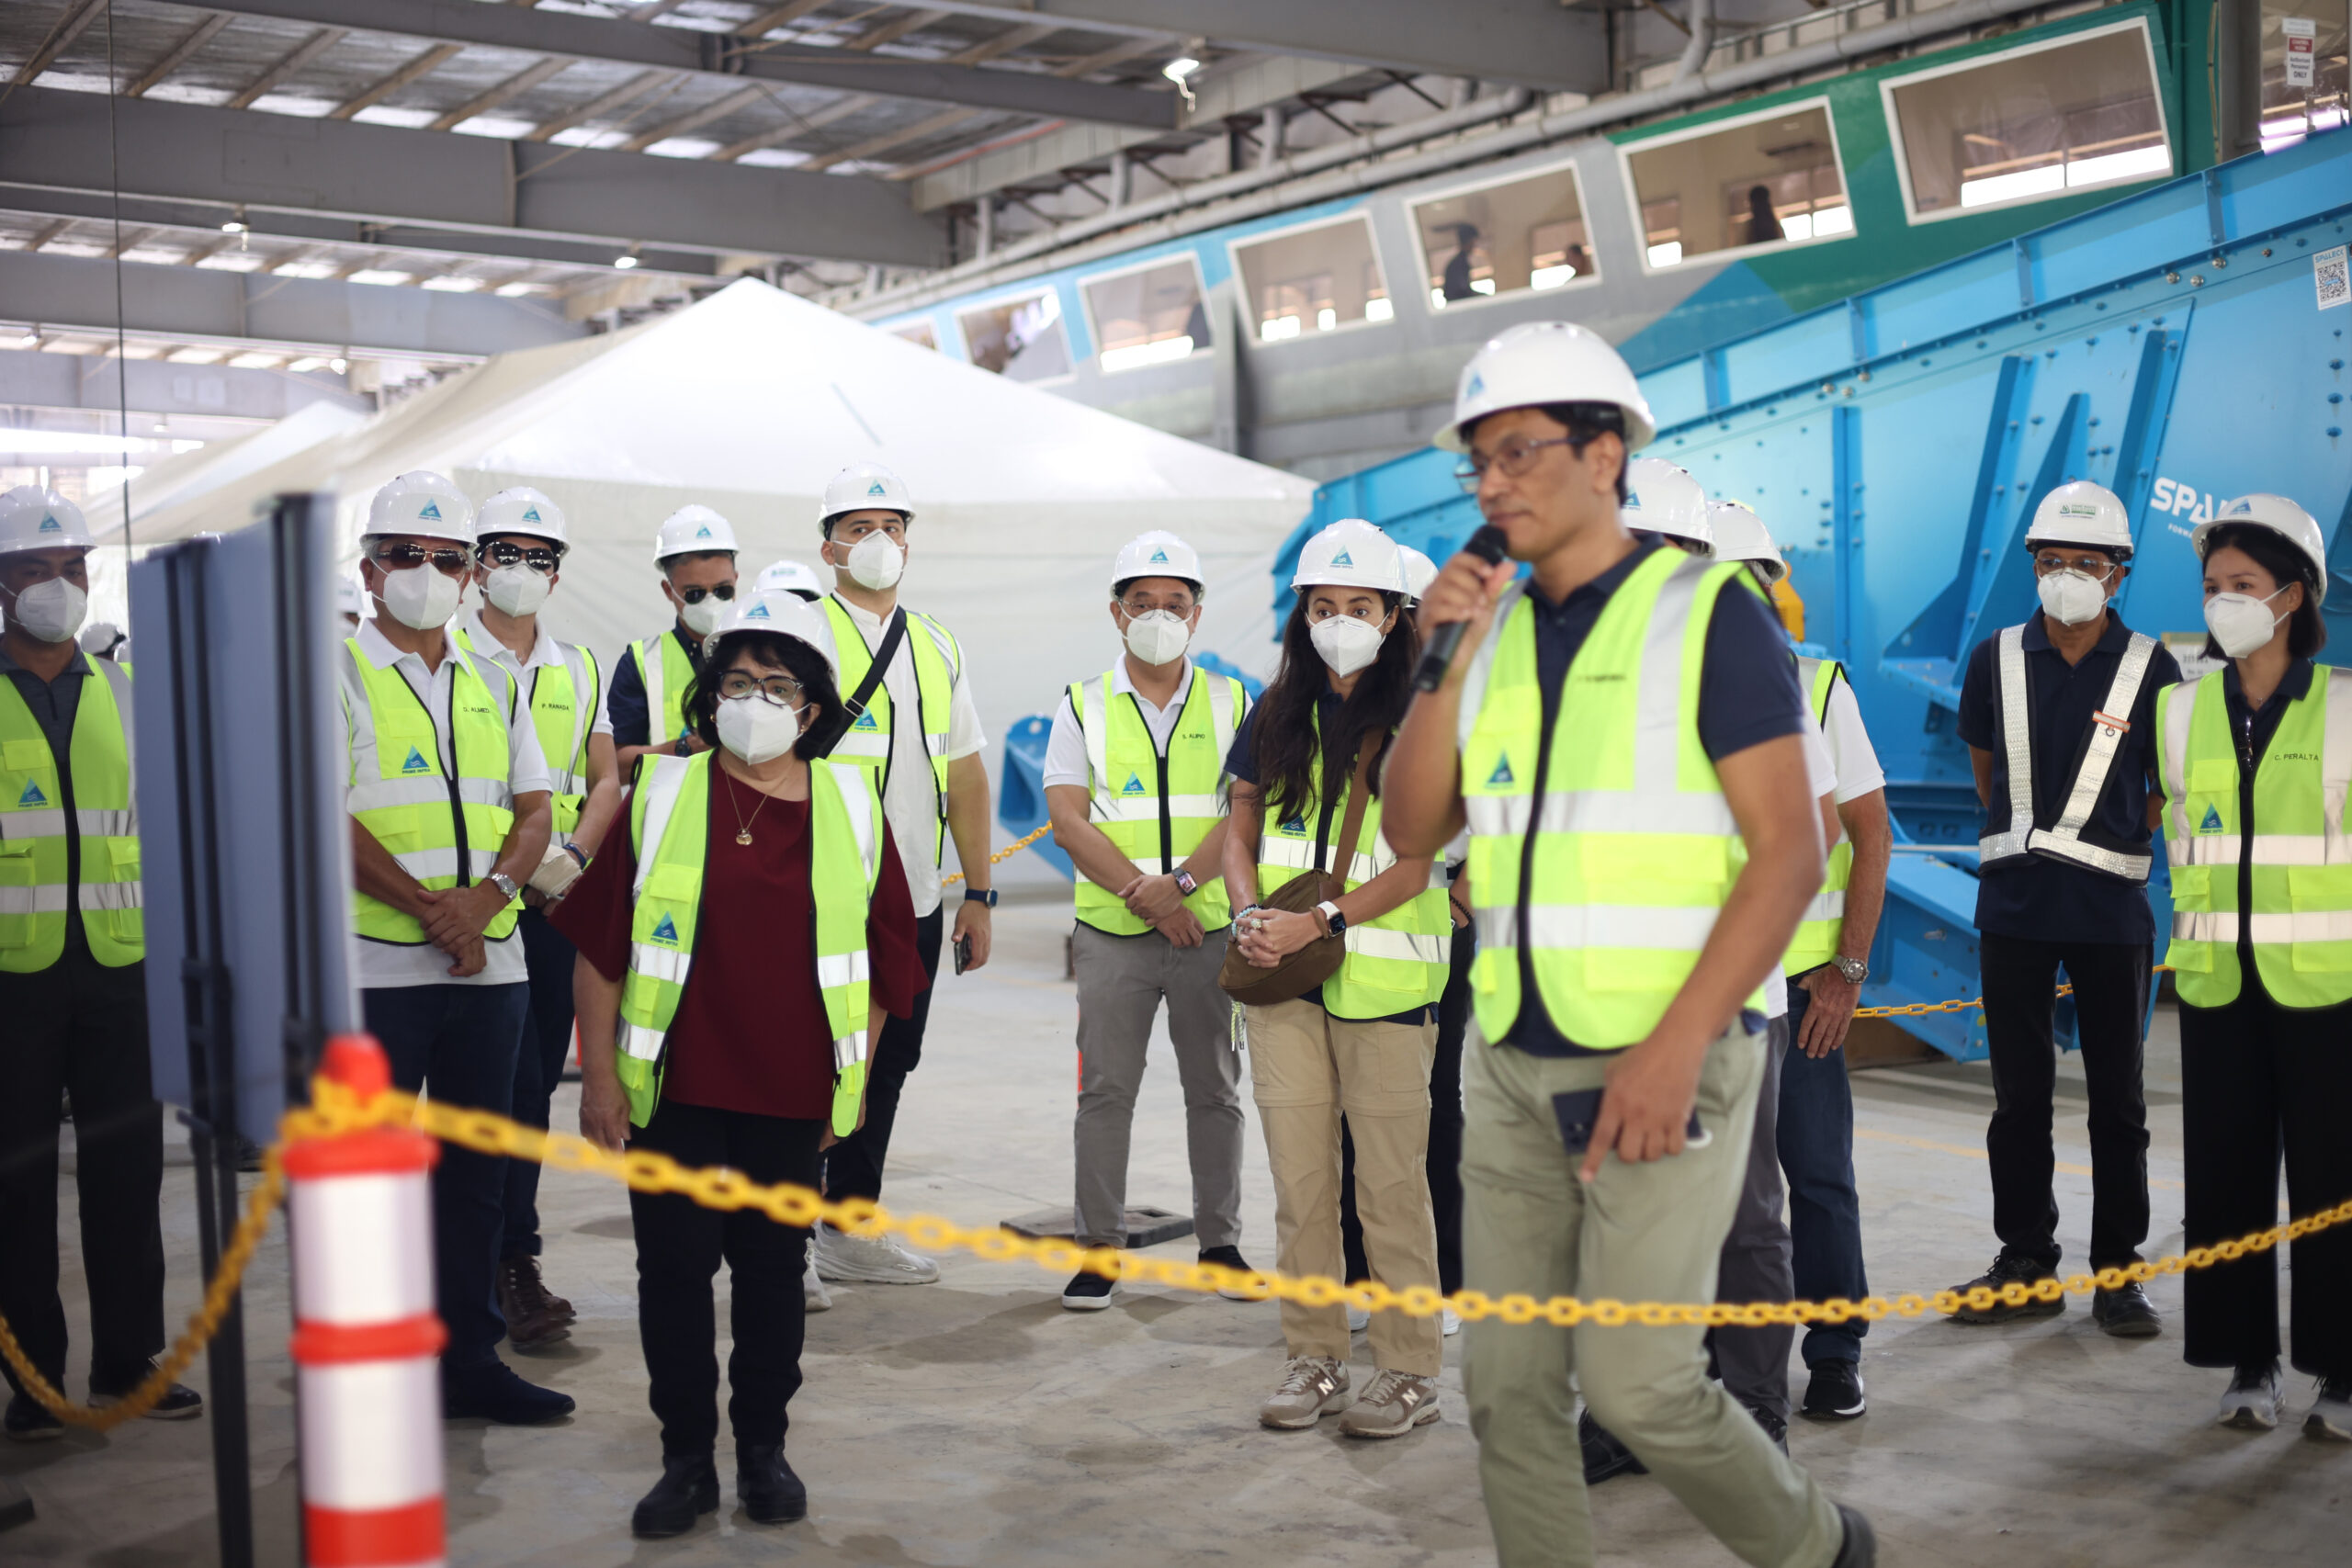 DENR Secretary Ma. Antonia Yulo-Loyzaga listens to the tour during the inauguration of Prime Integrated Waste Solutions’ Materials Recovery Facility in Cebu.